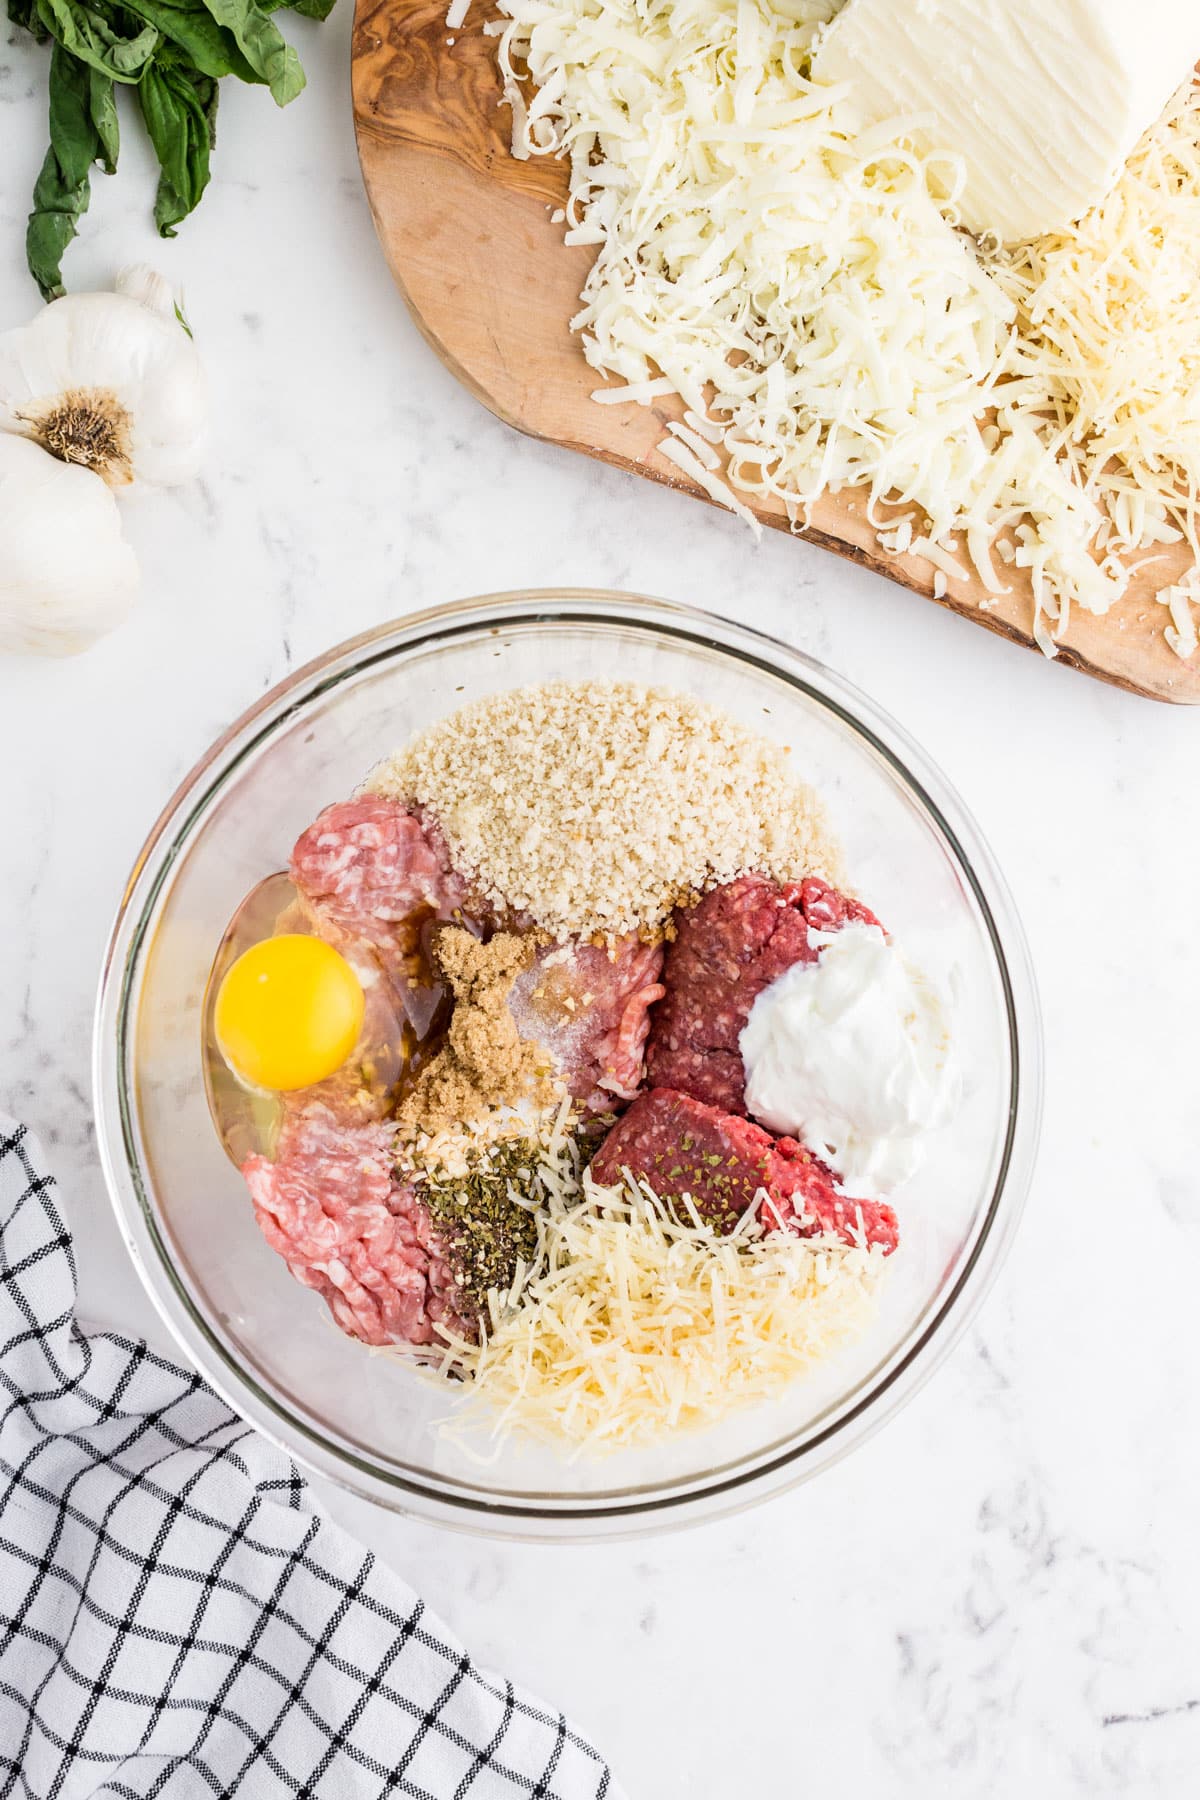 Medium mixing bowl with egg, ground meat, bread crumbs, seasoning, and parmesan cheese, wooden kitchen board with cheese, on a marble countertop.